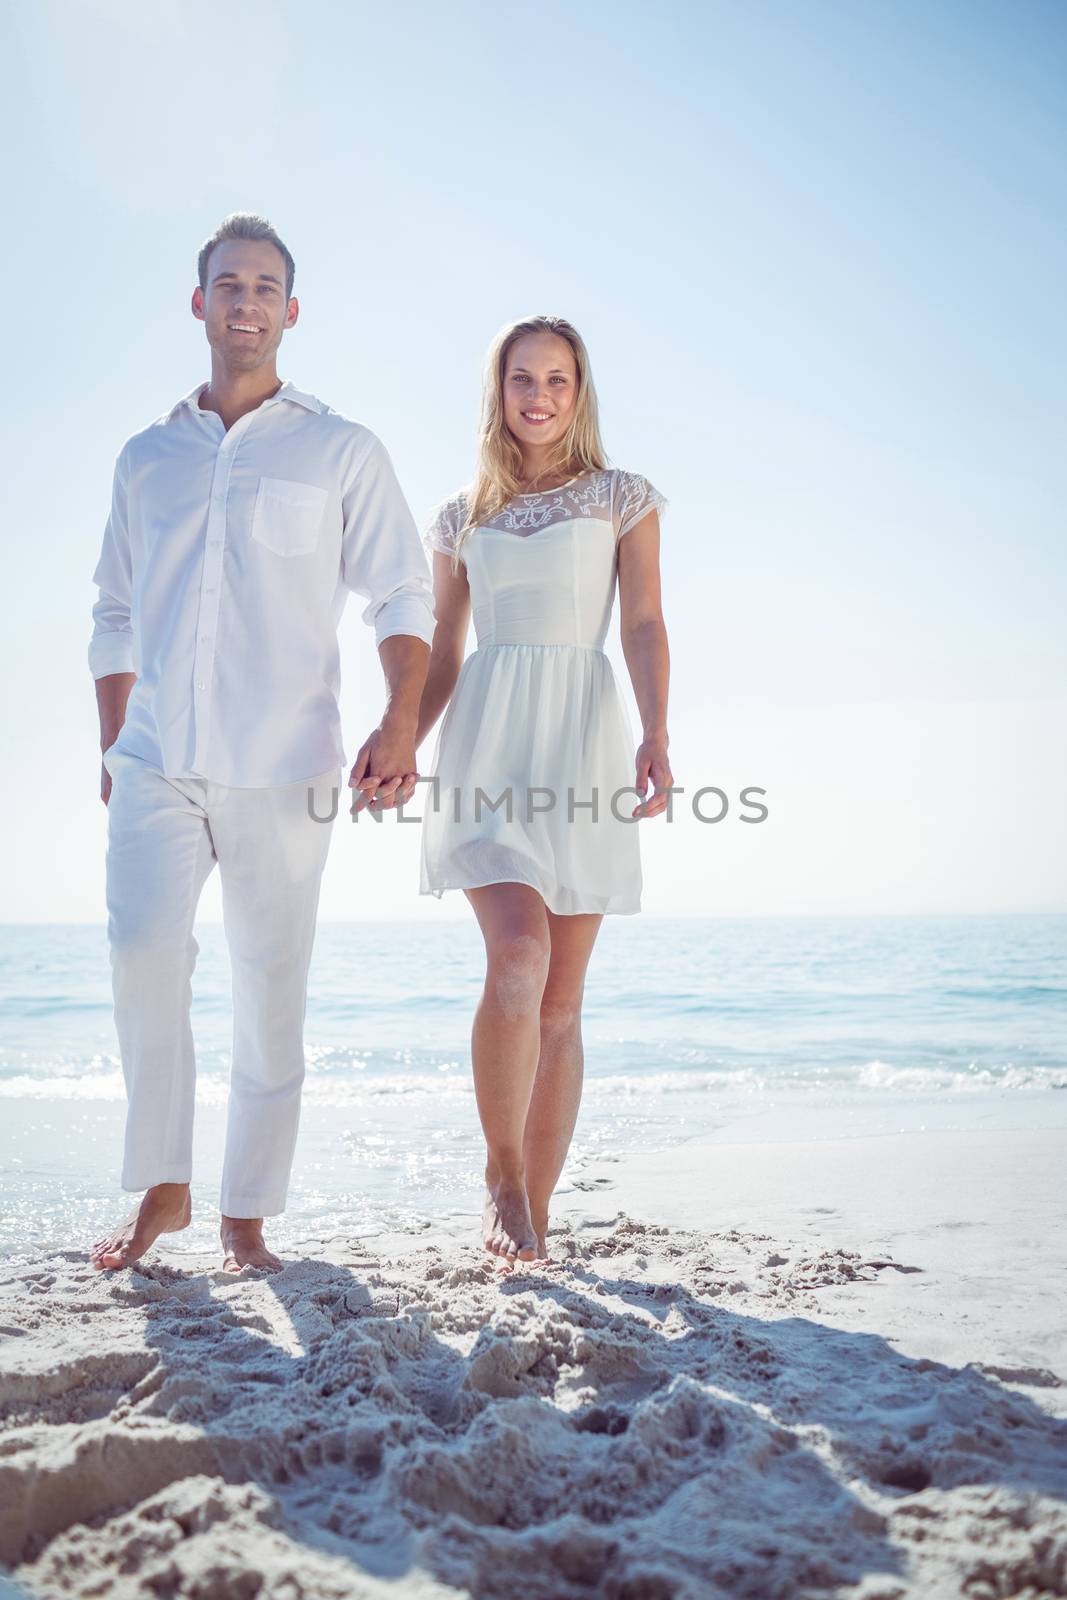 Romantic casual young couple holding hands and standing at the beach